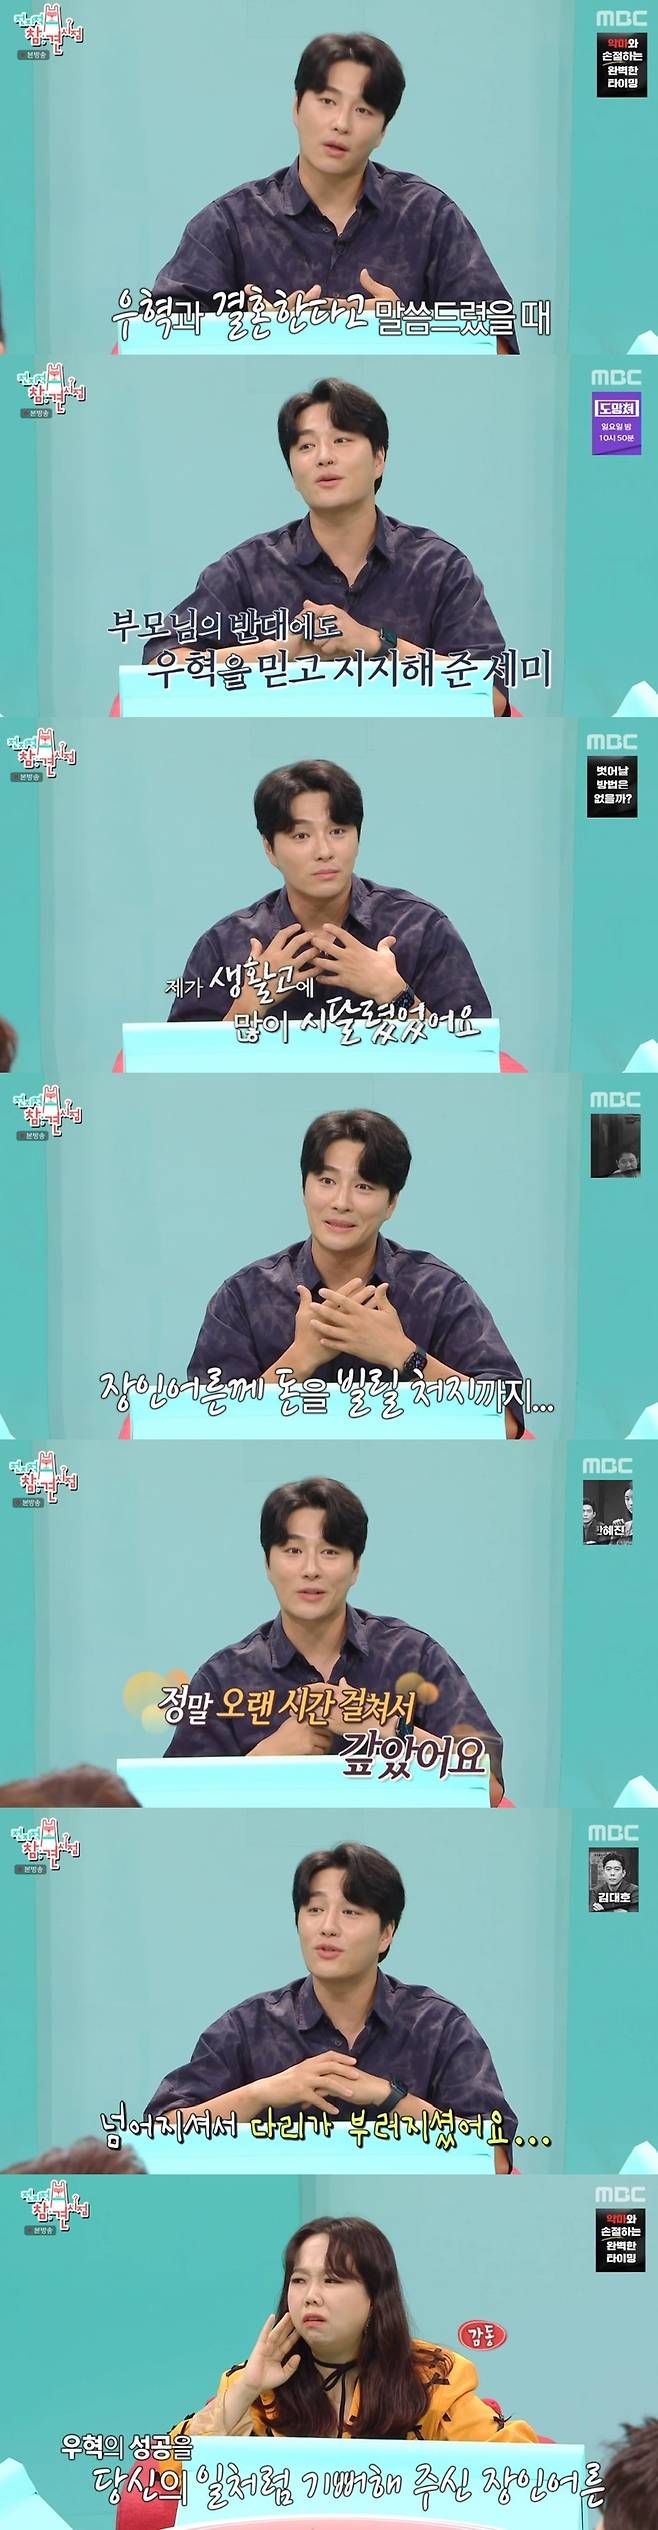 Point of Omniscient Interfere Min Woo Hyuk on Life andOn September 9, MBC  ⁇ Point Point of Omniscient Interfere  (hereinafter referred to as Point of Omniscient Interfere) appeared with Min Woo Hyuk and revealed a more busy daily life.On the show, Min Woo Hyuk and Lee Se-mi recalled their past on the move.Lee Se-mi said, I went to hello and said hello. Then he said, I have a terrible little grandfather, and I think you will be my family. I want to be a family.Min Woo Hyuk said, Lee Se-mi brought me as a boyfriend before marriage, but my parents objected because I was an aspiring actor. Lee Se-mi said, This friend is going to be good and has a strong sense of responsibility. He said.He also suffered a lot from life and I went to borrow money from my father-in-law. He said, My father-in-law lent me money and paid it back with interest over a long period of time. I was so happy when I received the money that I fell down while dancing on the street and hurt my leg.On the other hand, Point of Omniscient Interfere is a program that shows the real life of the stars that are released by the managers.